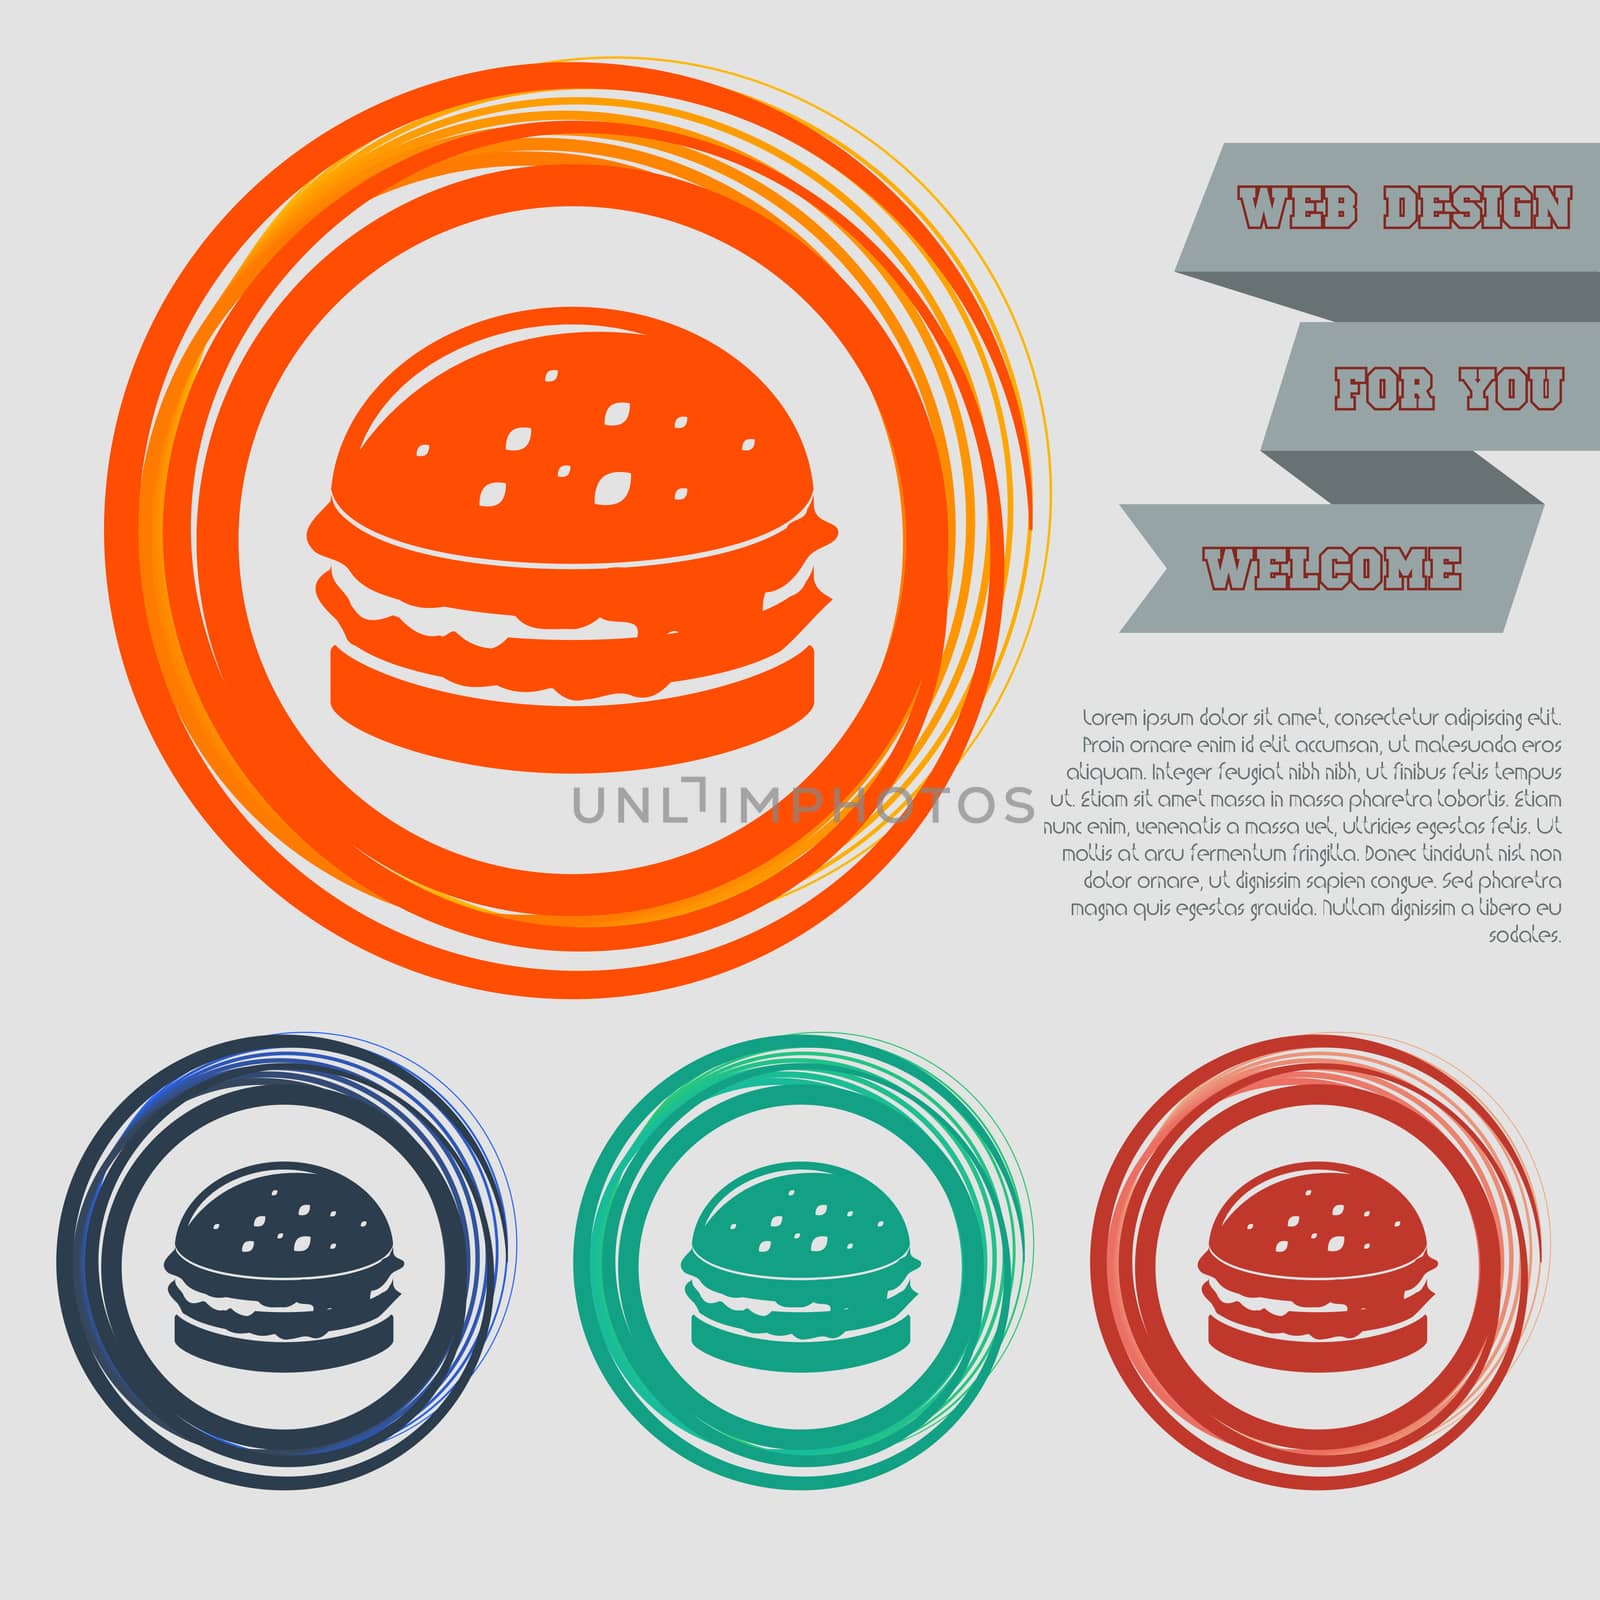 Burger, sandwich, hamburger icon on the red, blue, green, orange buttons for your website and design with space text.  by Adamchuk